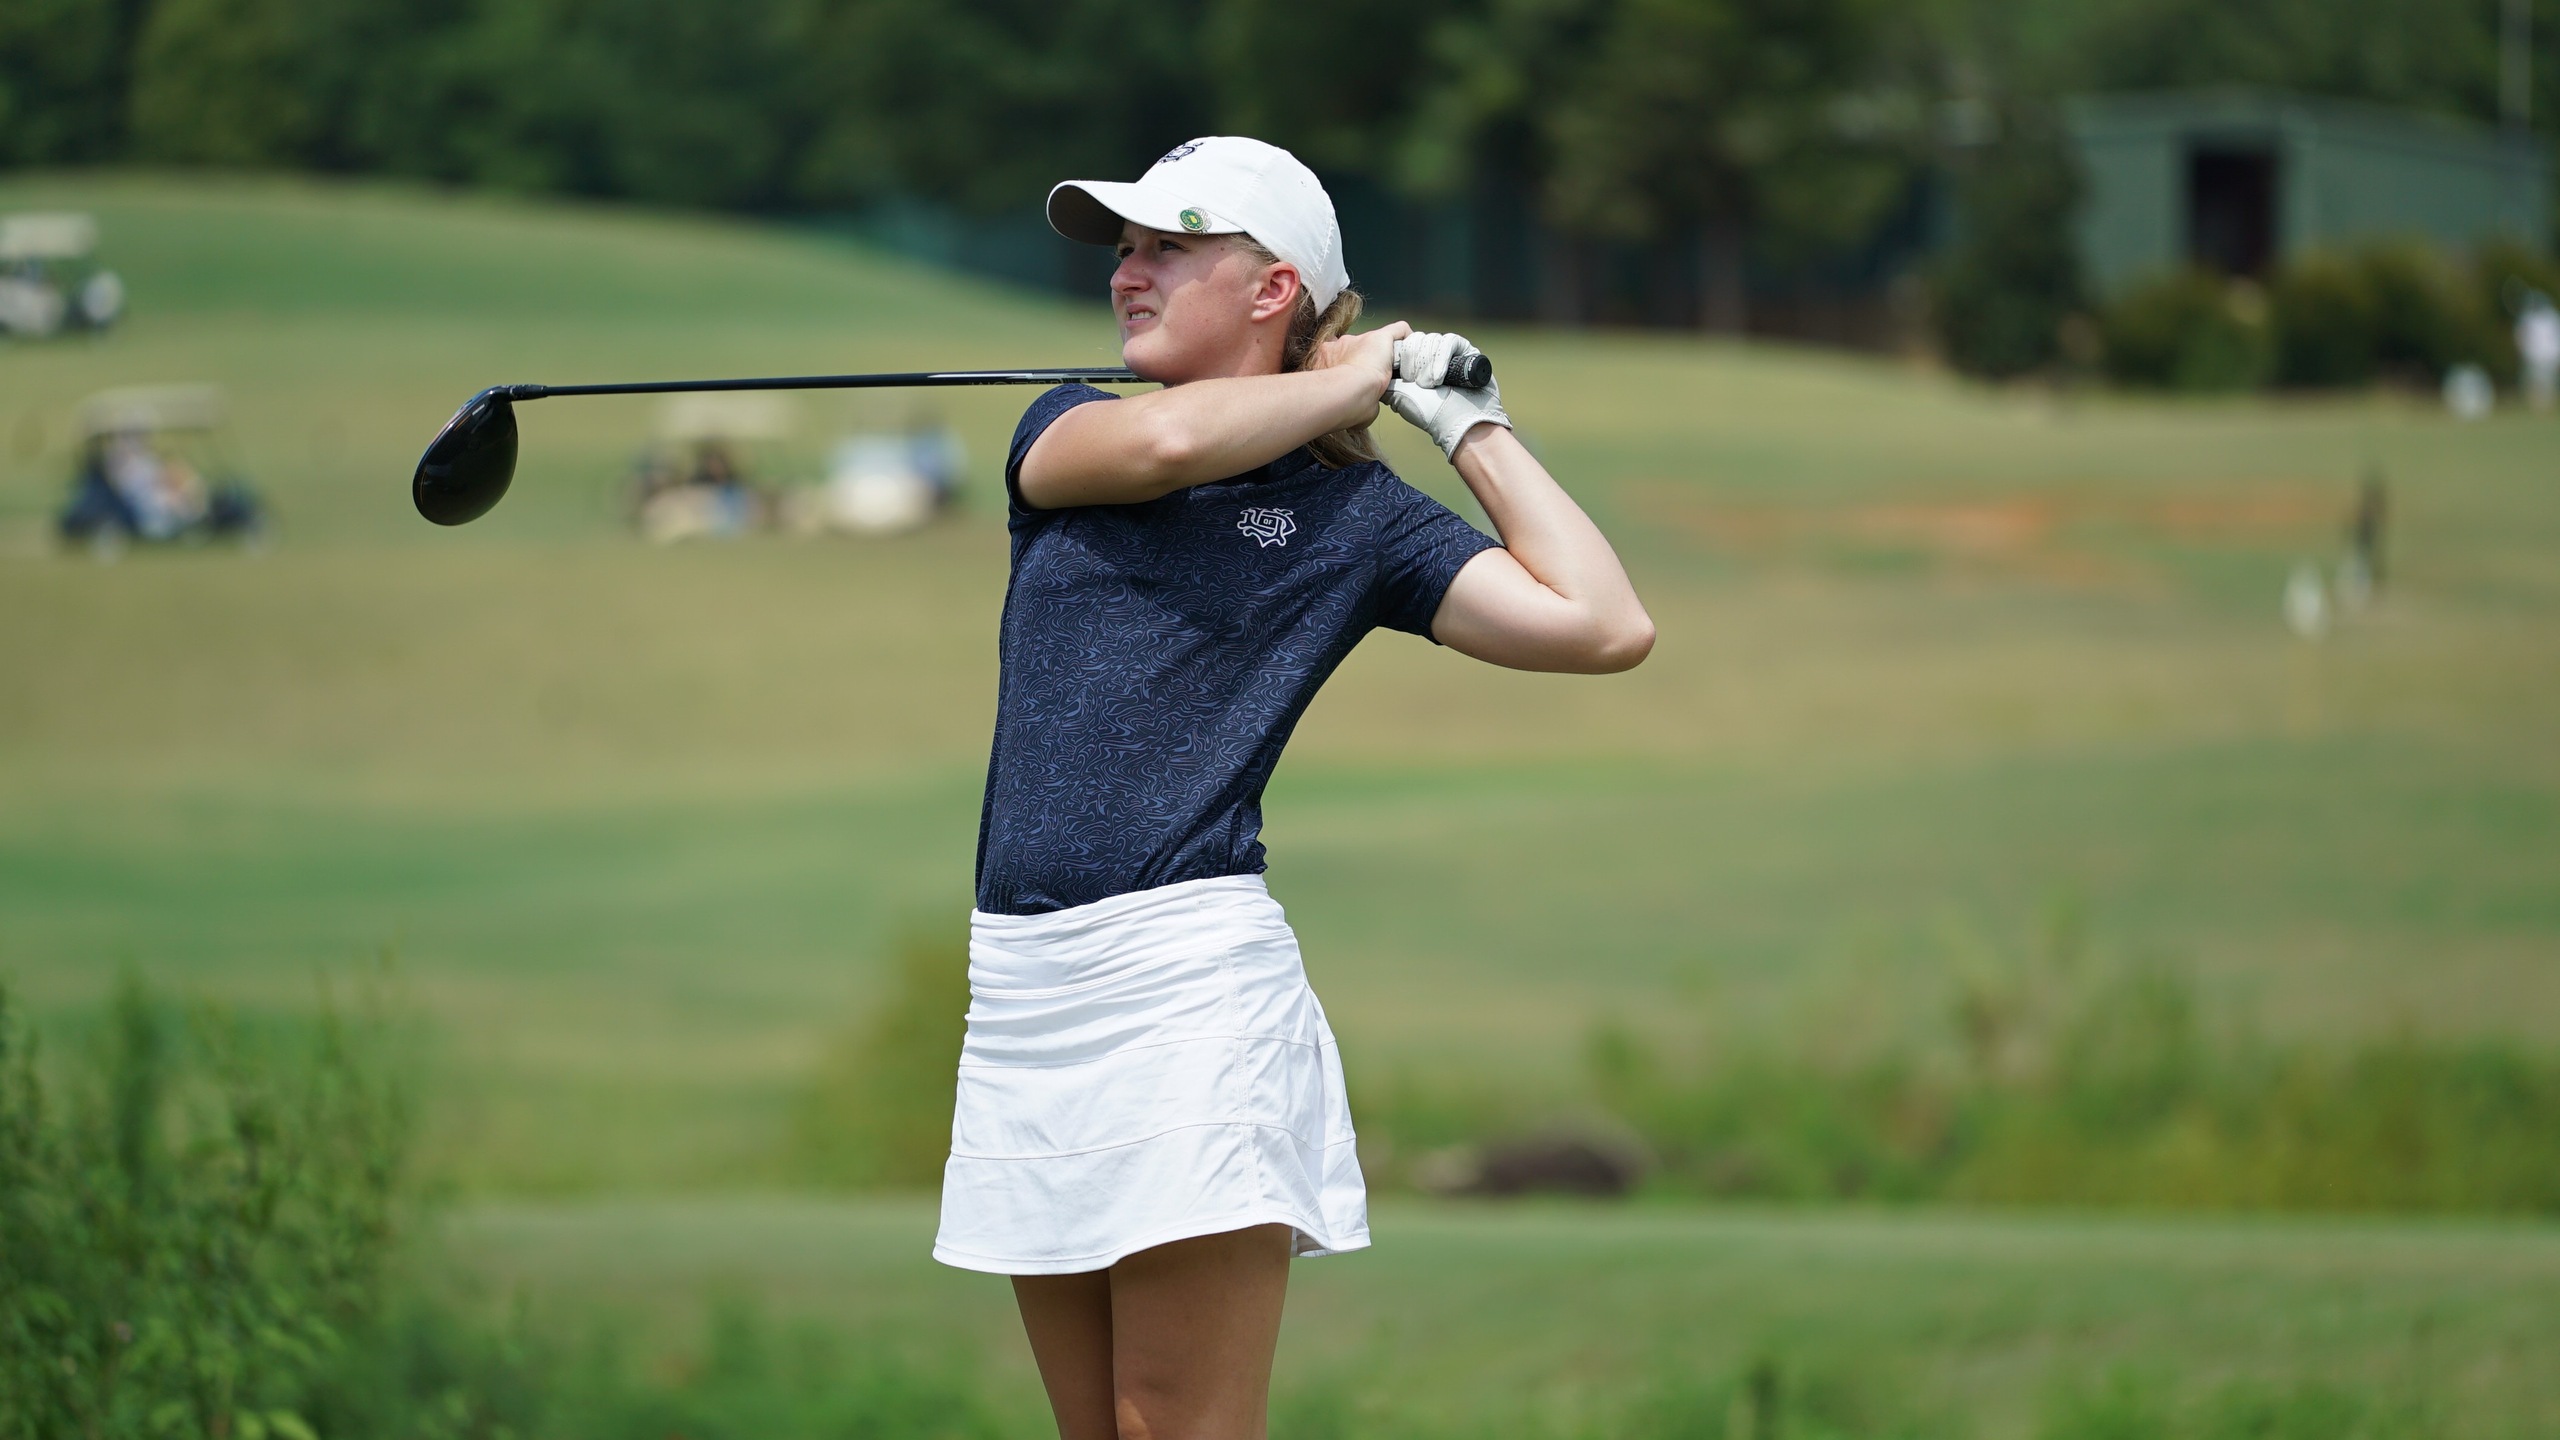 Women's Golf Wrap Up Day One of Chicken Express Classic